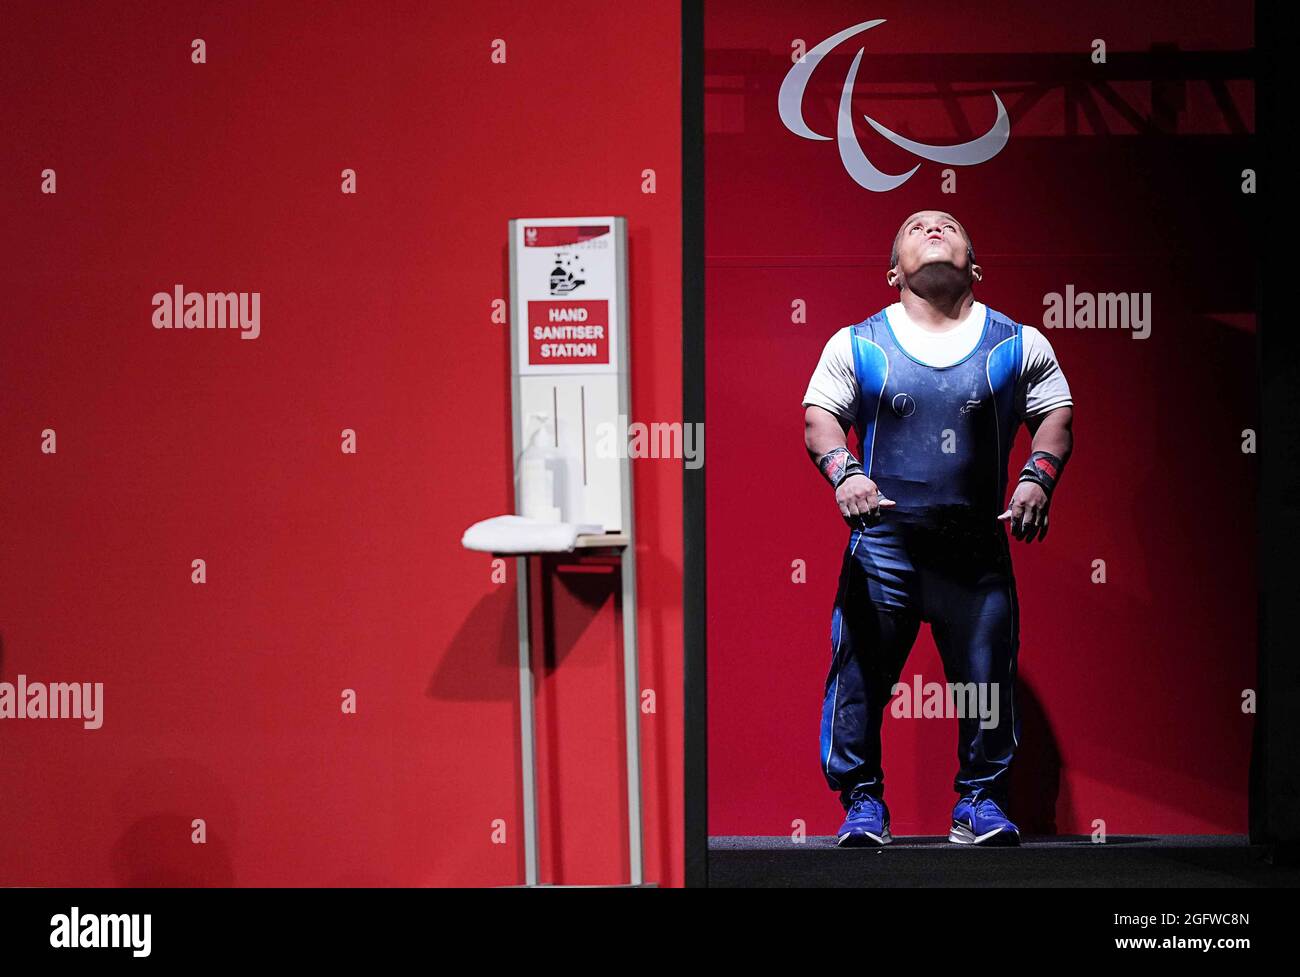 Tokyo, Japan. 27th Aug, 2021. Herbert Aceituno of El Salvador reacts during the men's 59kg final of powerlifting event at the Tokyo 2020 Paralympic Games in Tokyo, Japan, Aug. 27, 2021. Credit: Xiong Qi/Xinhua/Alamy Live News Stock Photo